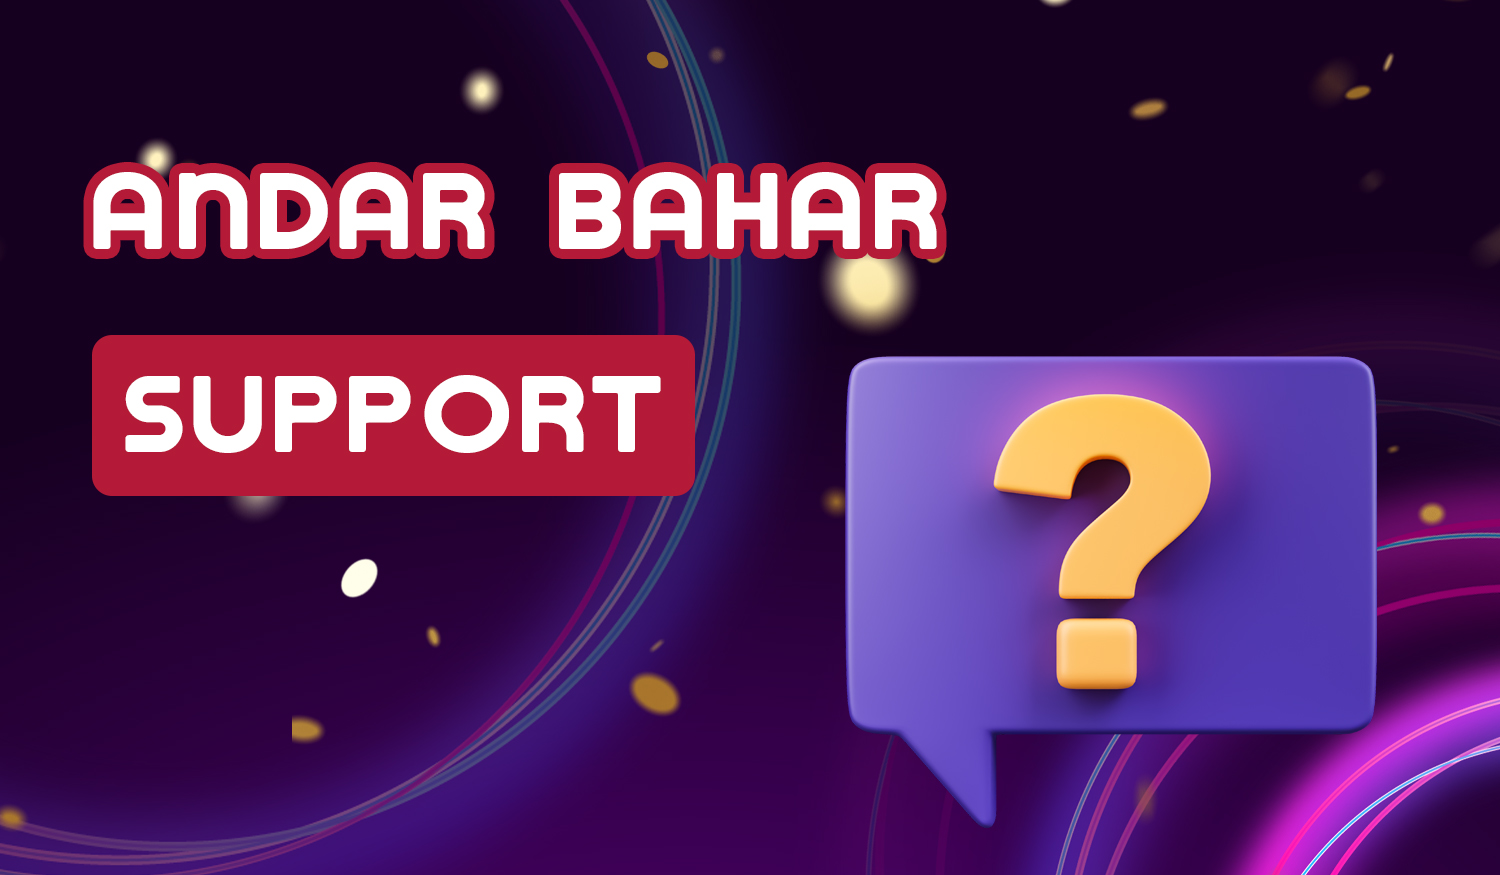 Features support service at bookmakers providing access to the game Andar Bahar